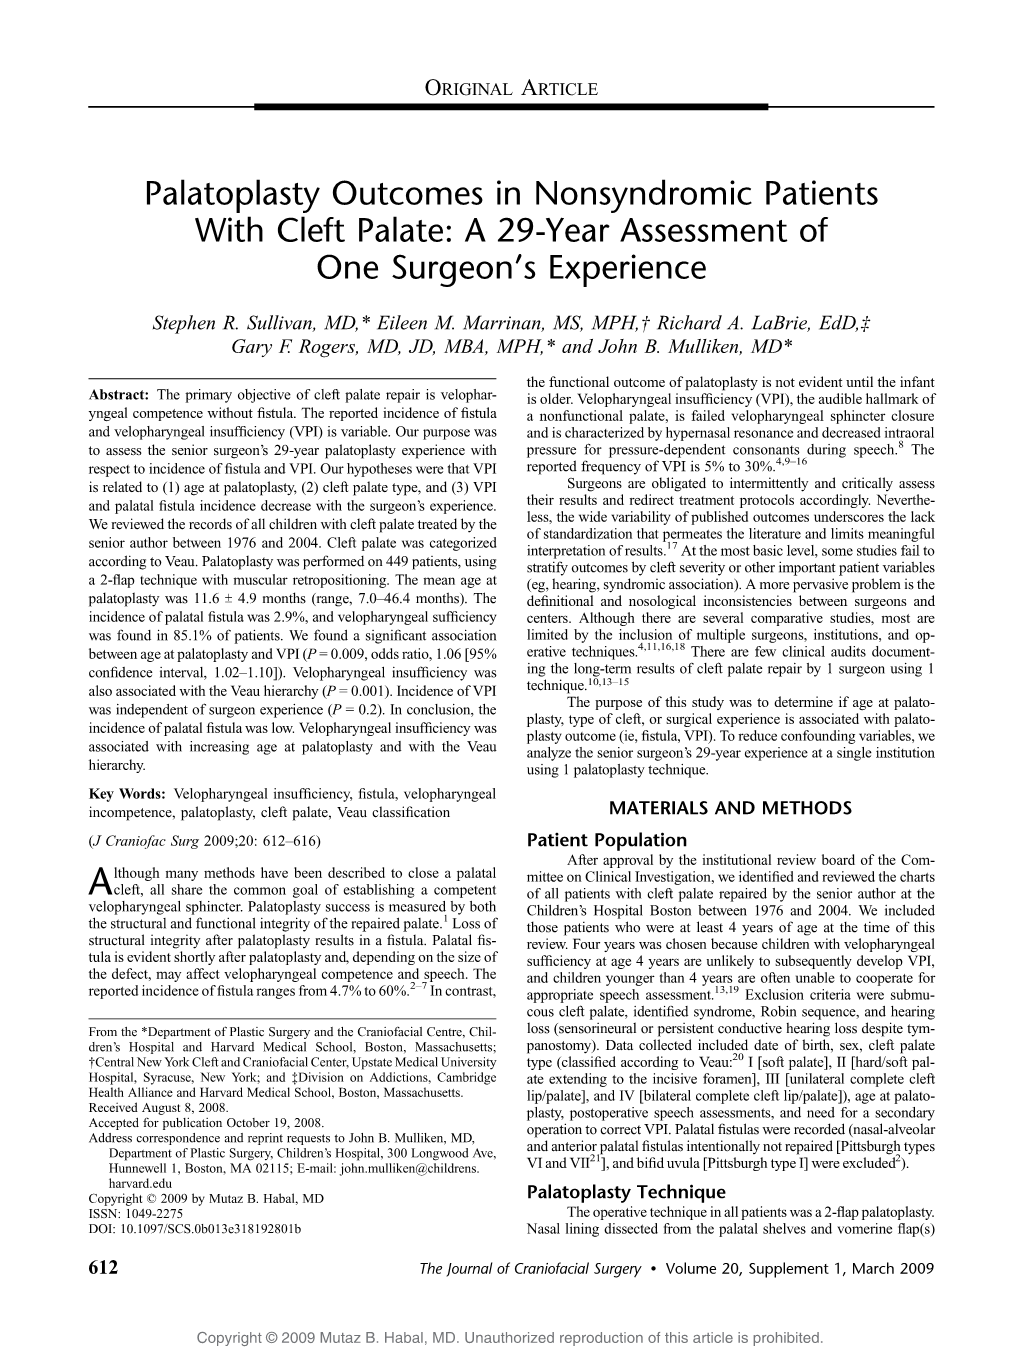 Palatoplasty Outcomes in Nonsyndromic Patients with Cleft Palate: a 29-Year Assessment of One Surgeon’S Experience